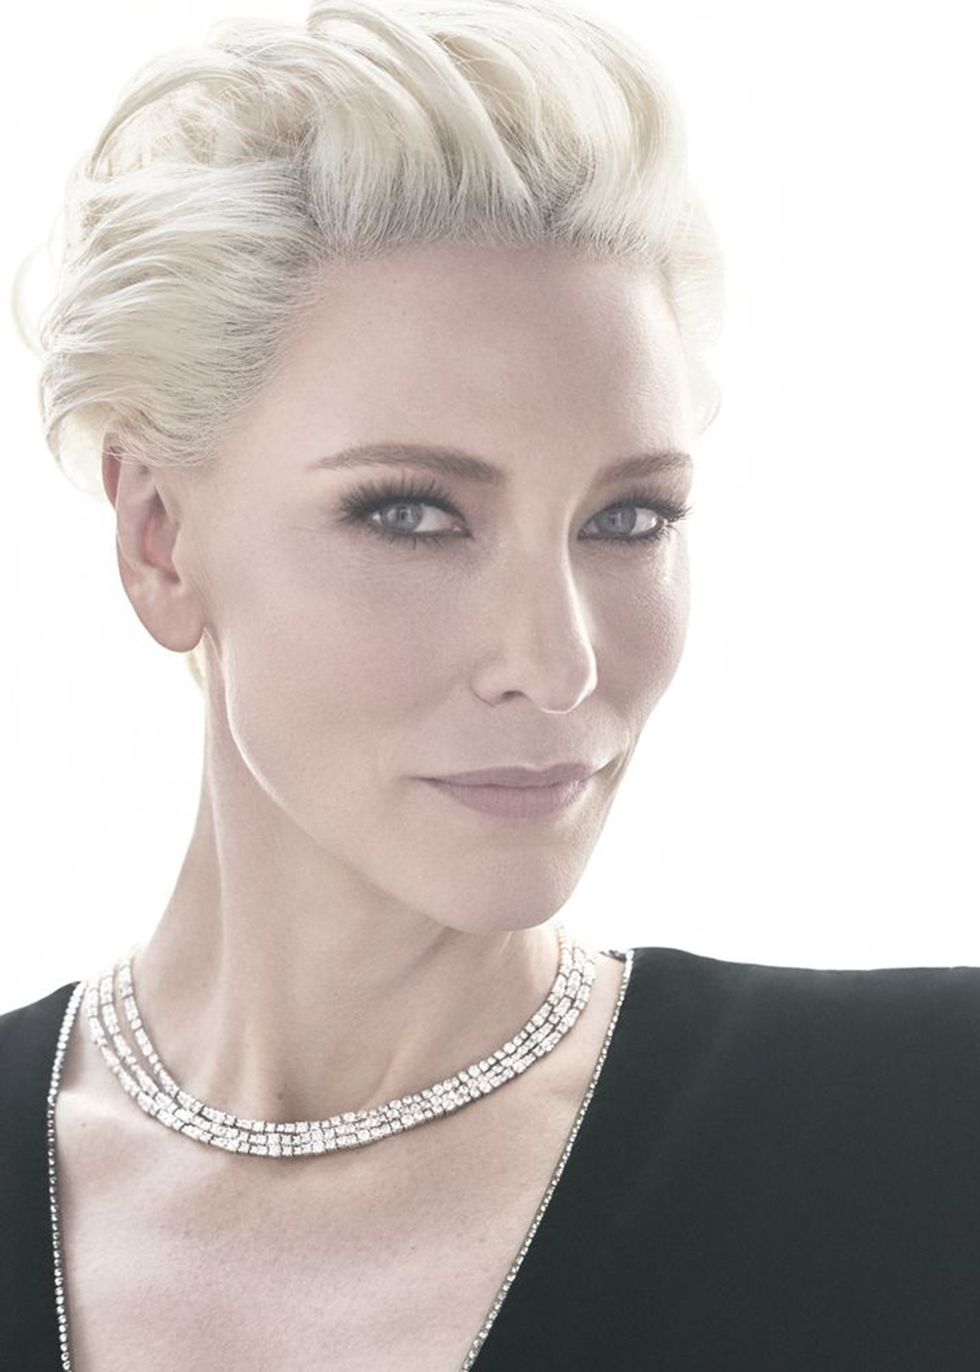 Cate Blanchett Made Her Own Sustainable, Pearl Necklace to the BAFTAs – WWD